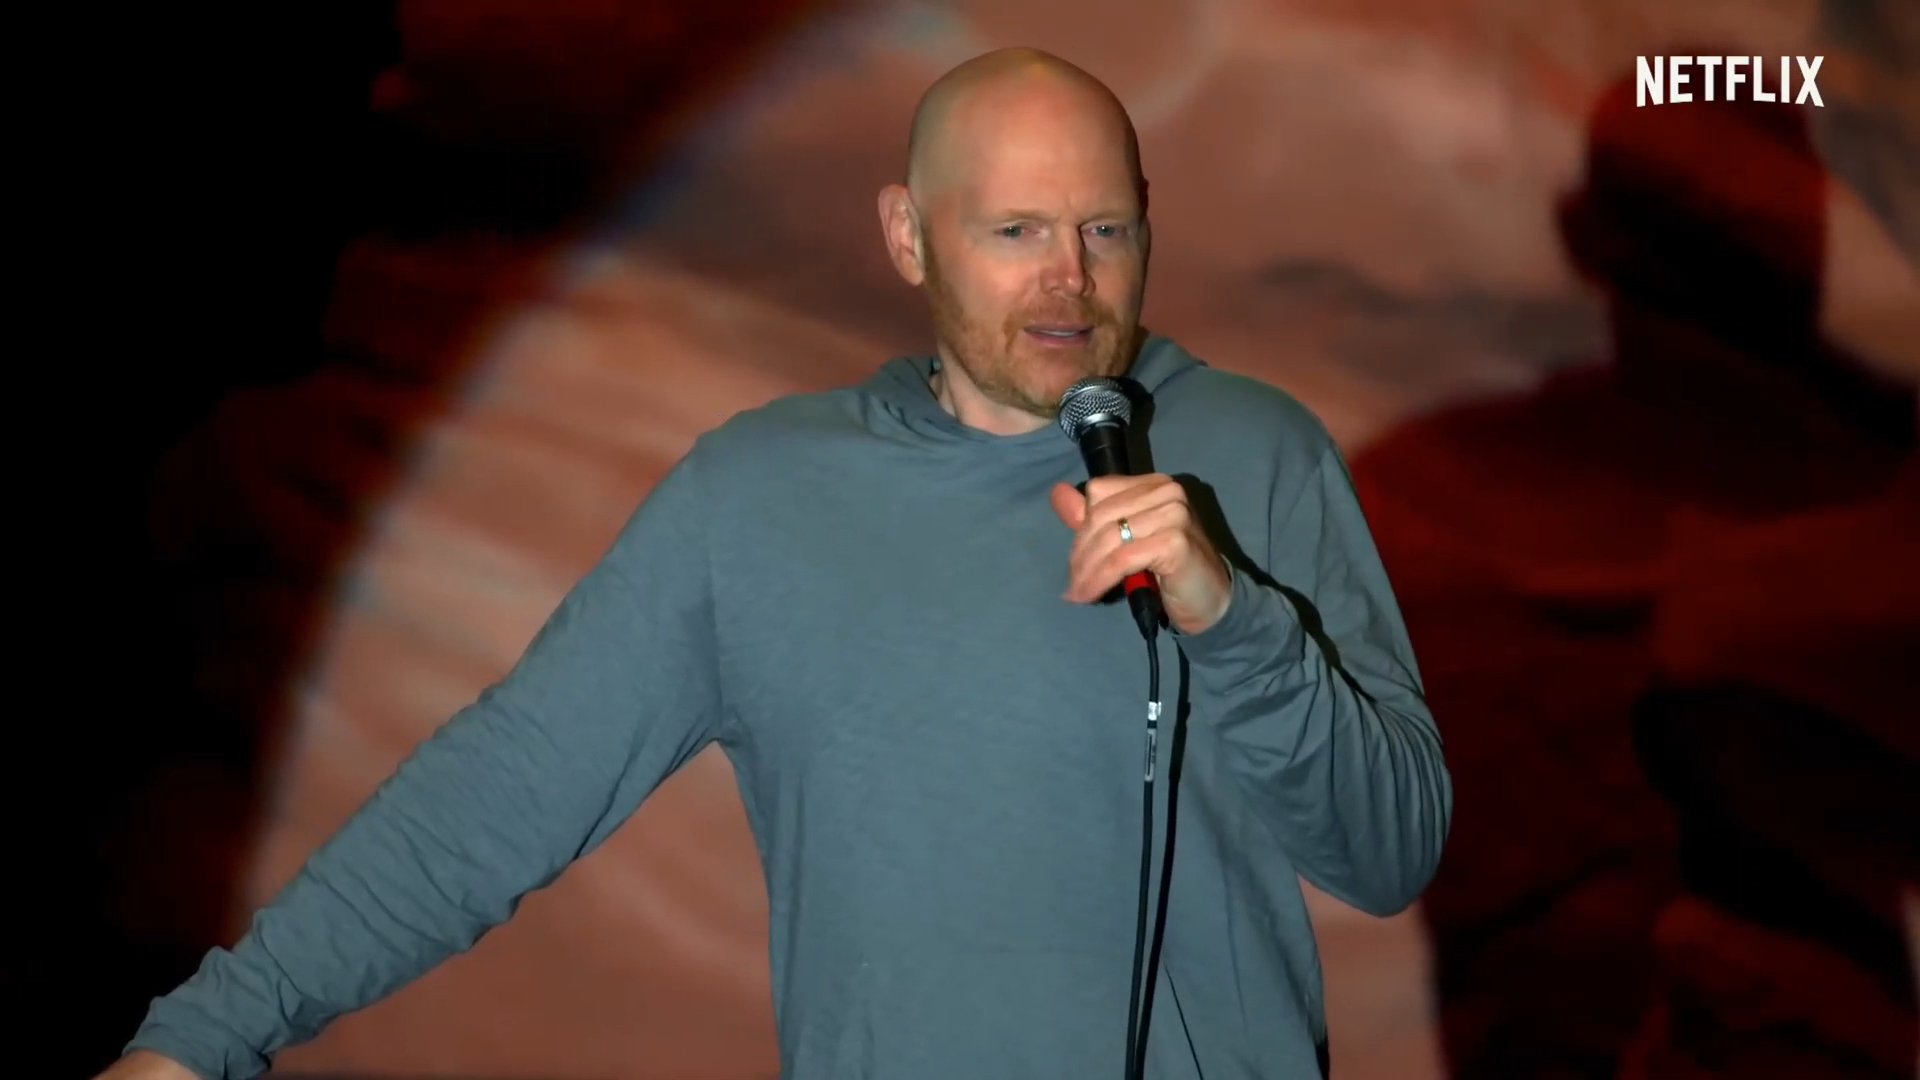 Bill Burr and other comedians: Abortion is "killing a baby"